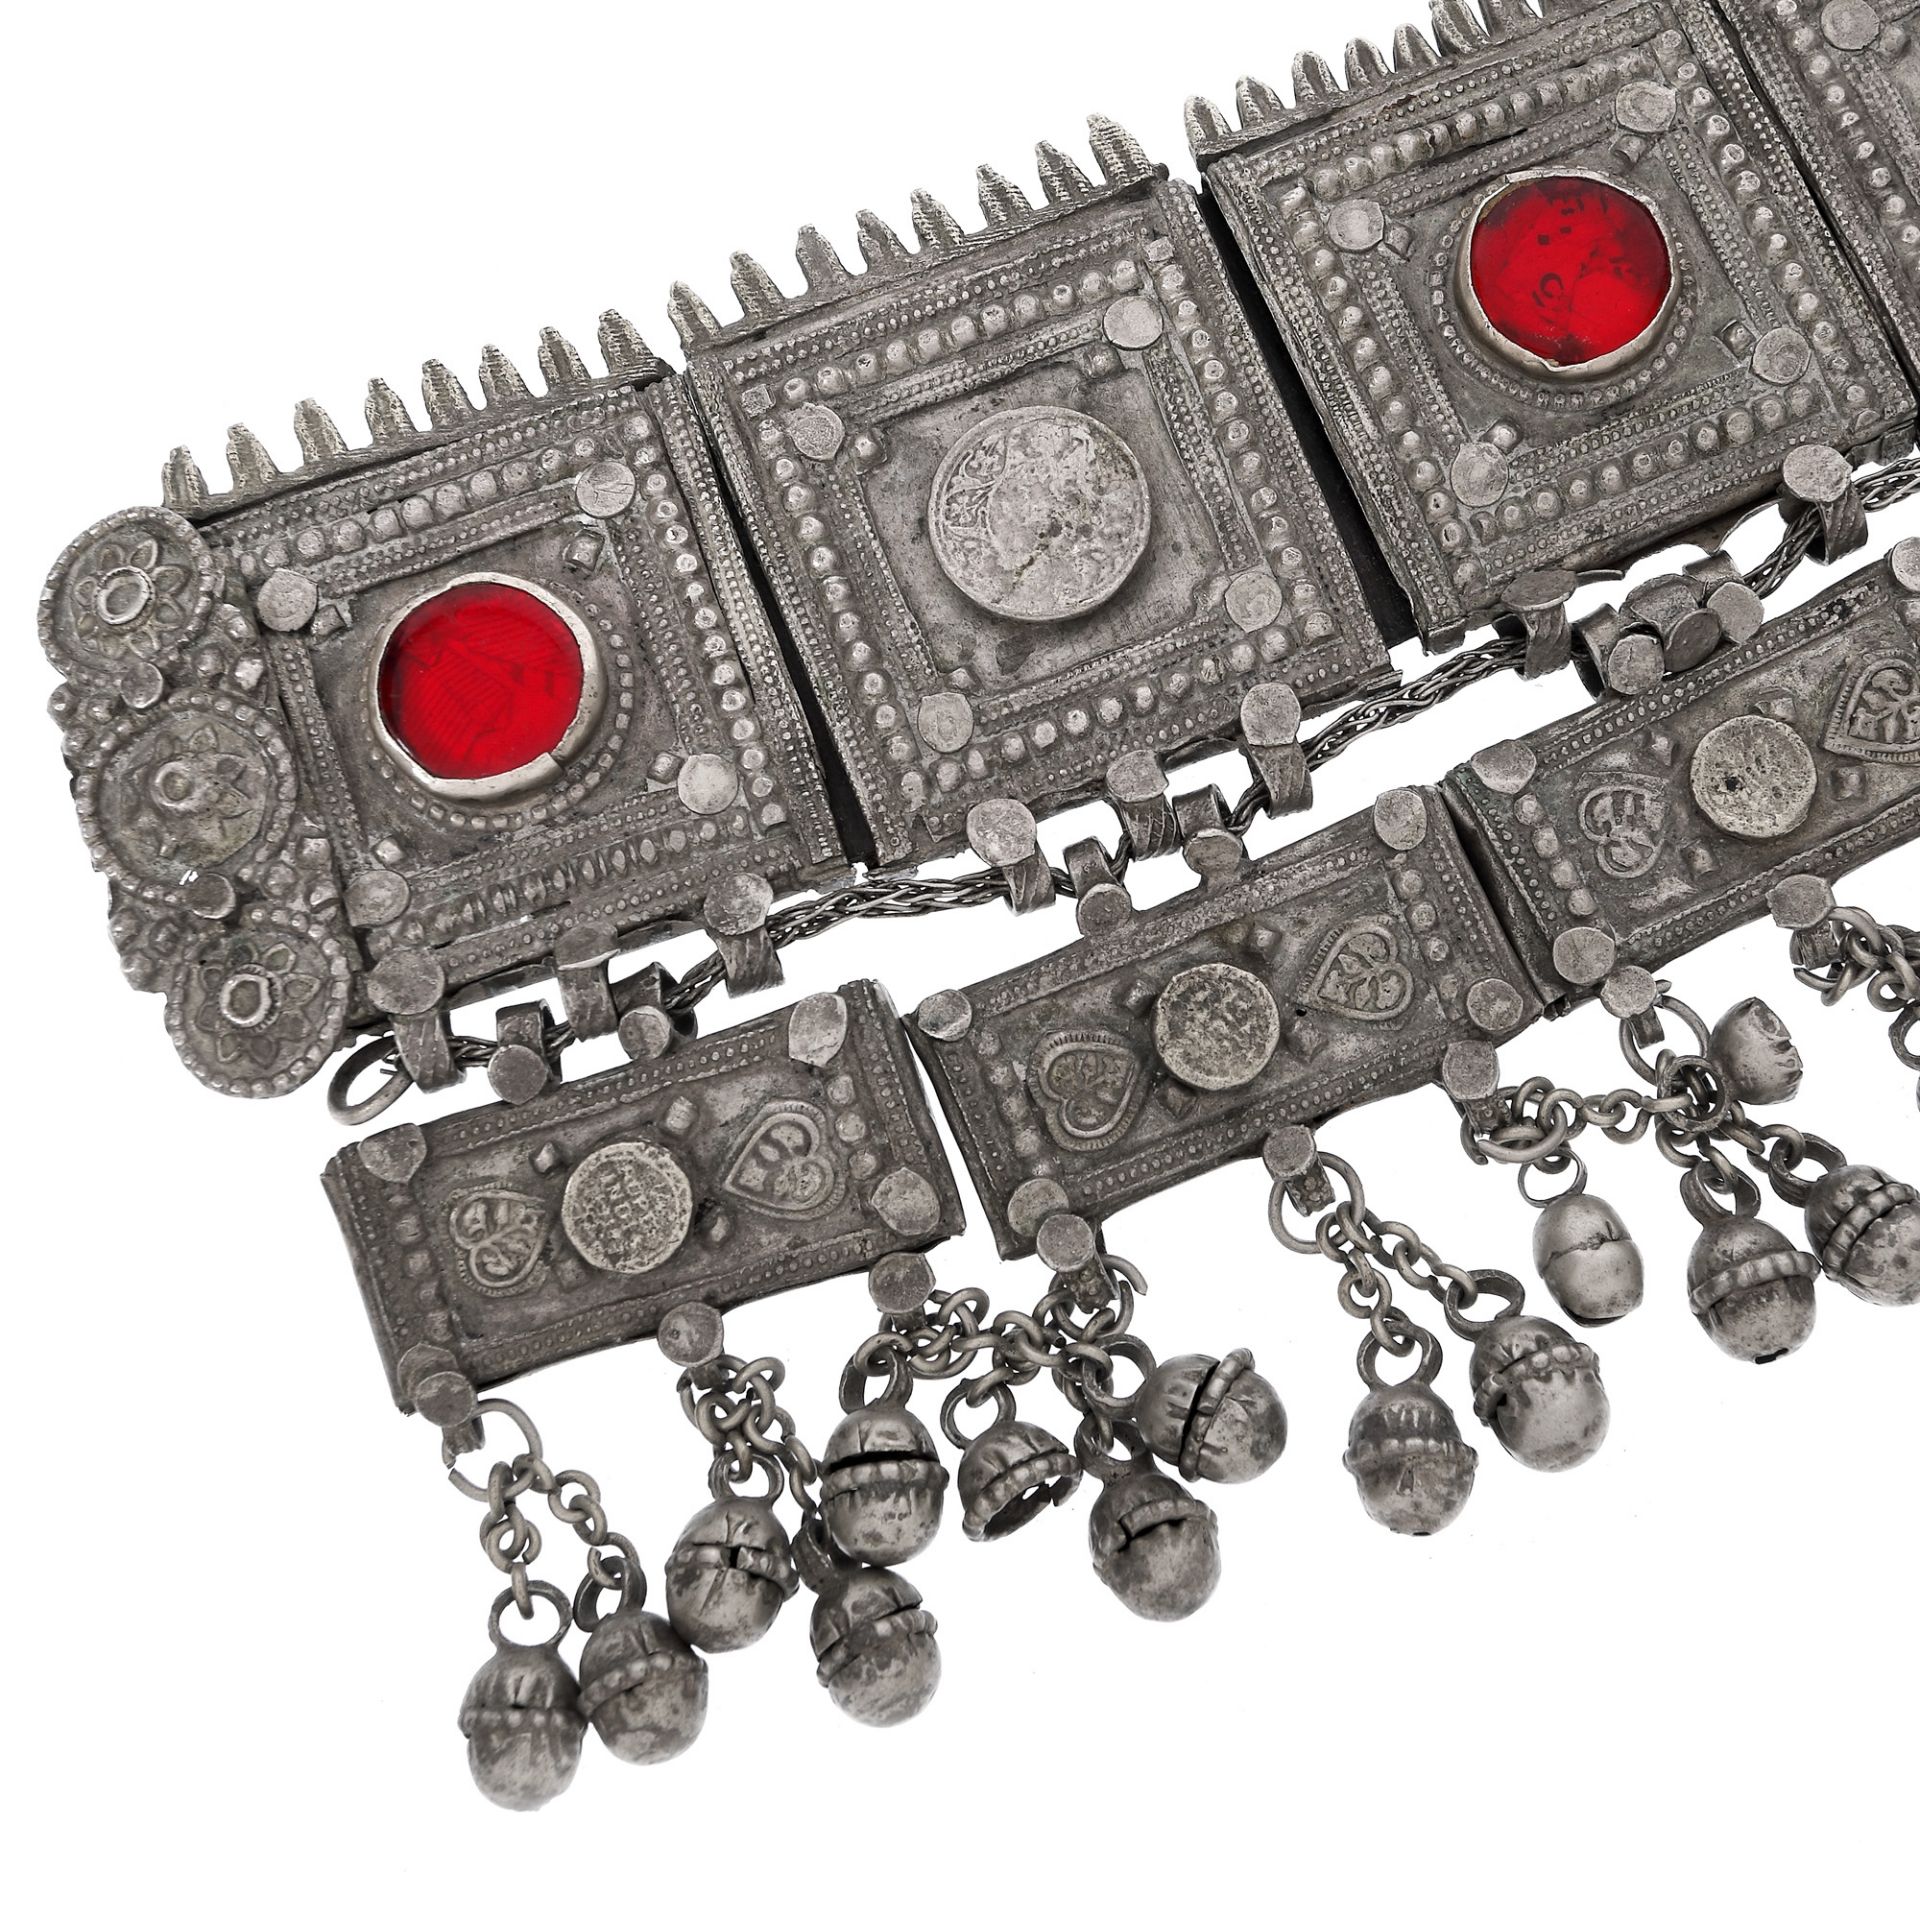 Kuchi Pashtun belt, decorated with resin and Indian Rupee coins, Pakistan, 1918 - Image 3 of 3